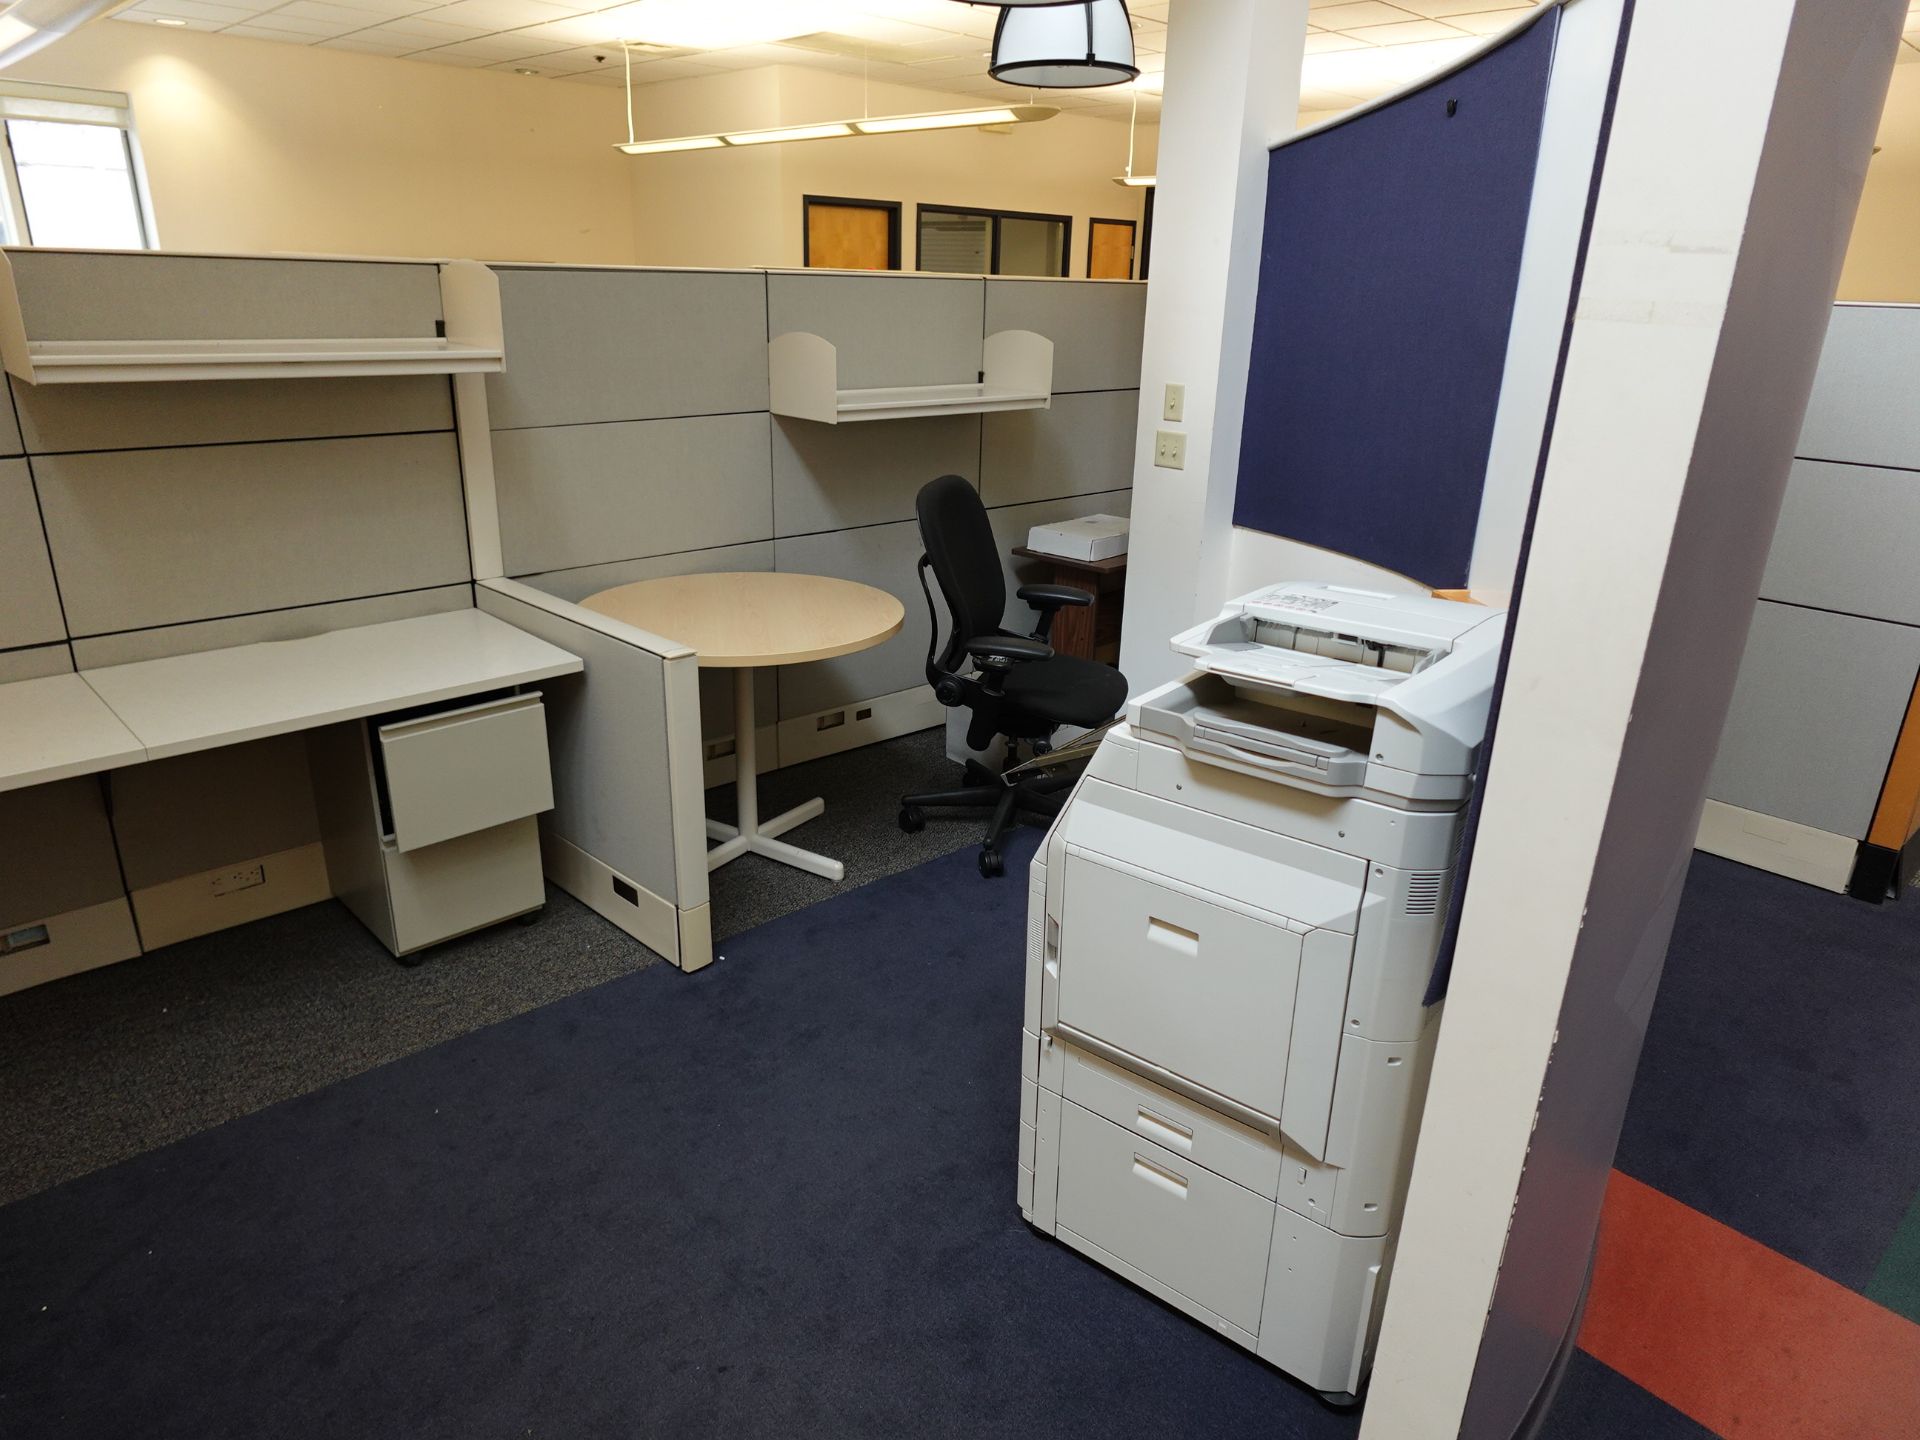 Haworth Office Cubicals - Image 8 of 11